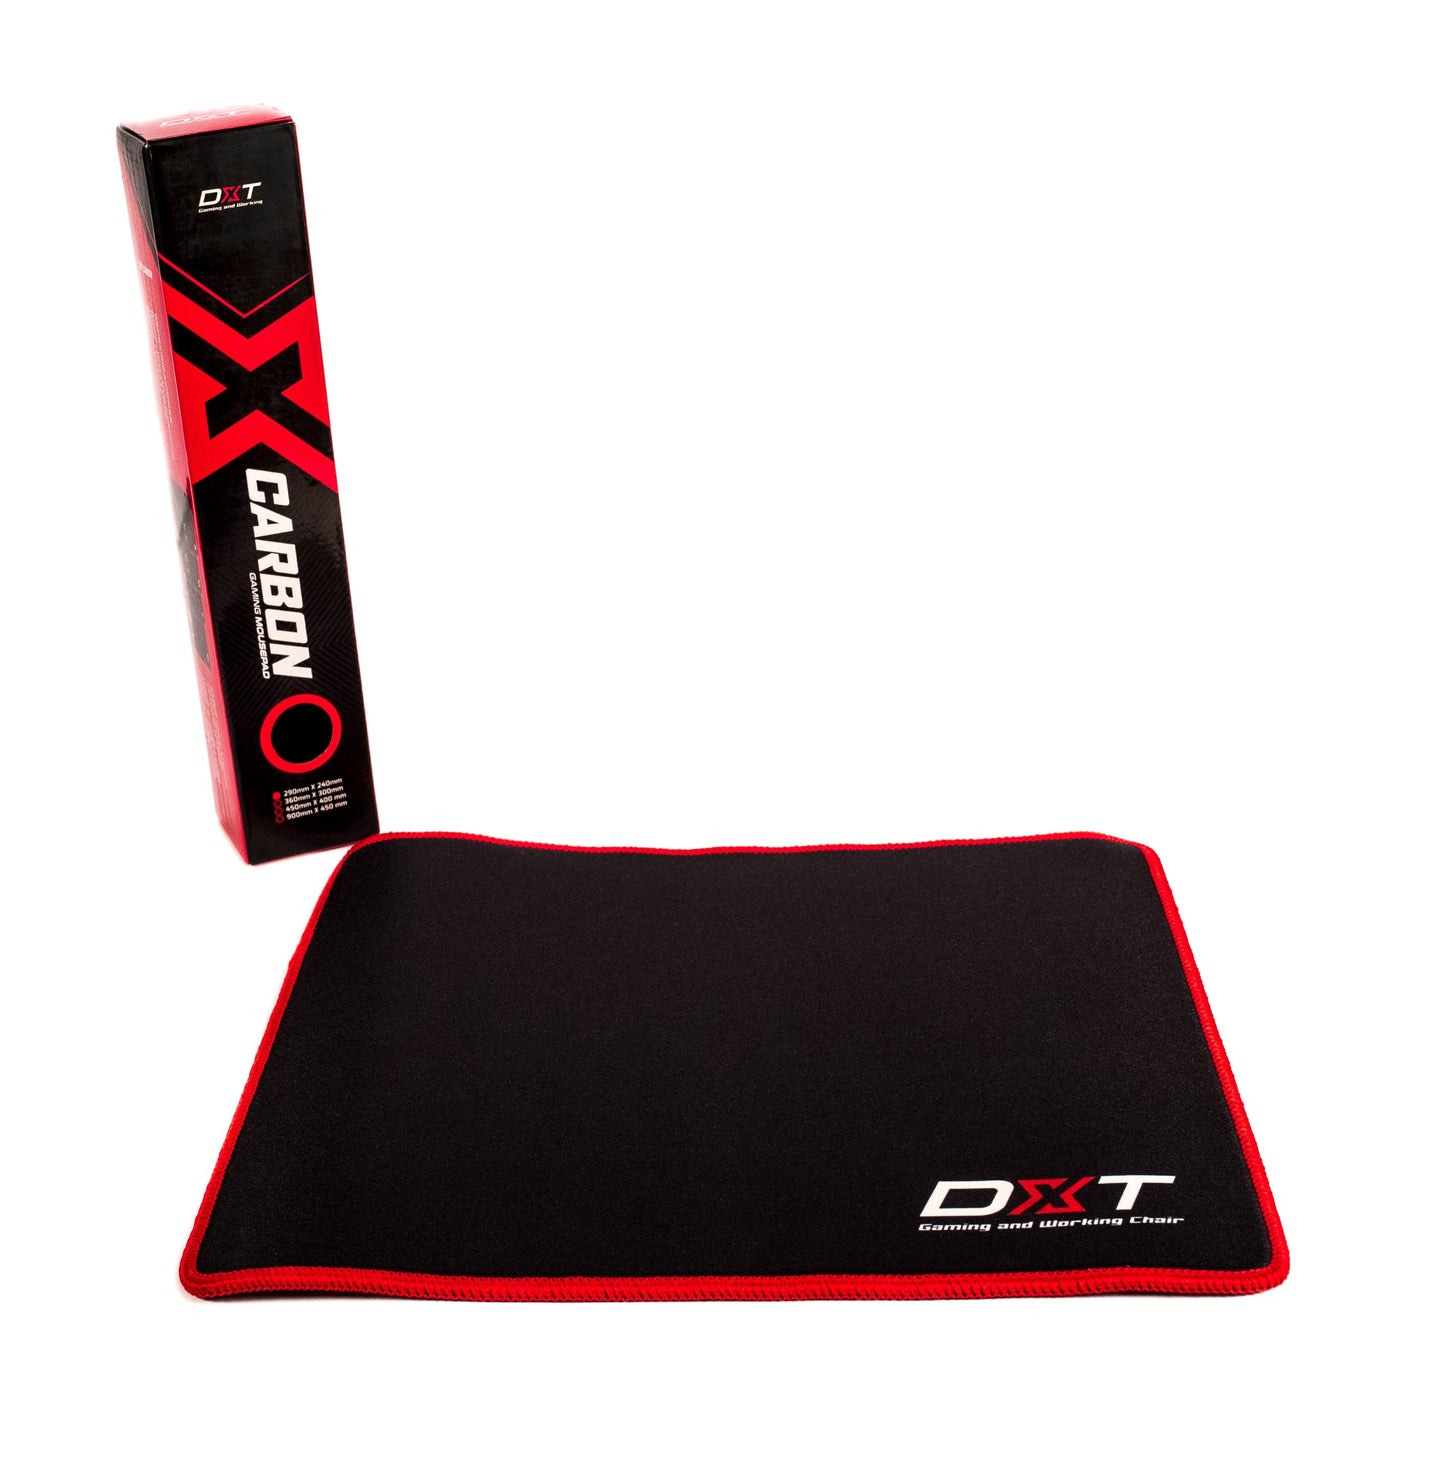 Accesorio - PC Gaming - Mouse Pad Carbon Negro/Rojo 450x400x4 mm L - DXT